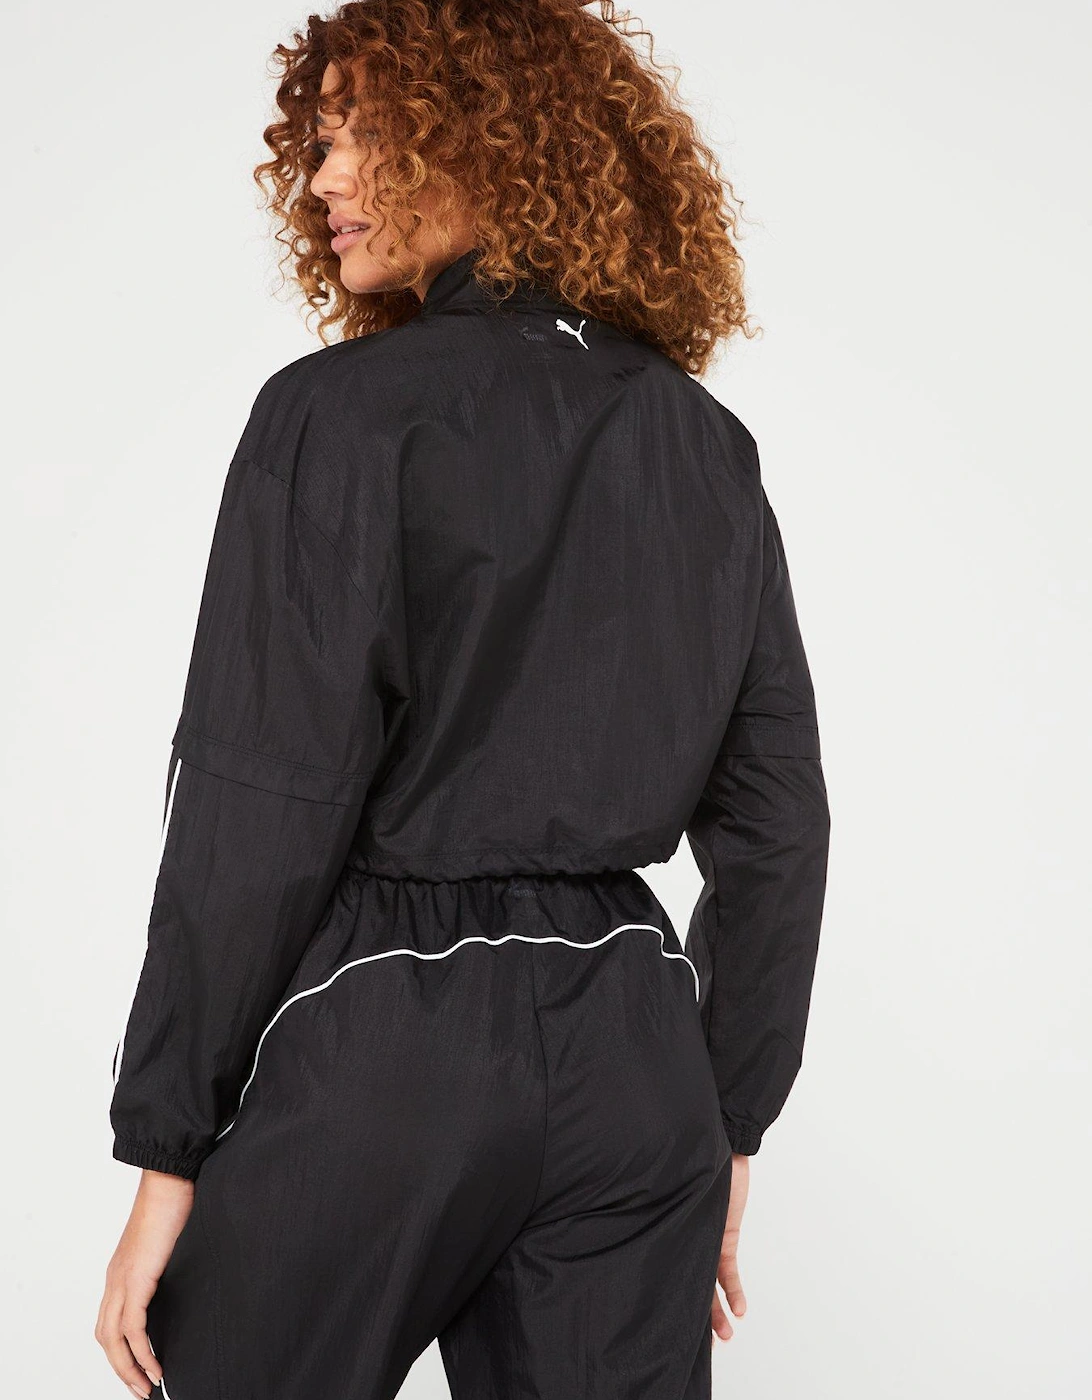 Womens Fit Move Woven Jacket - Black